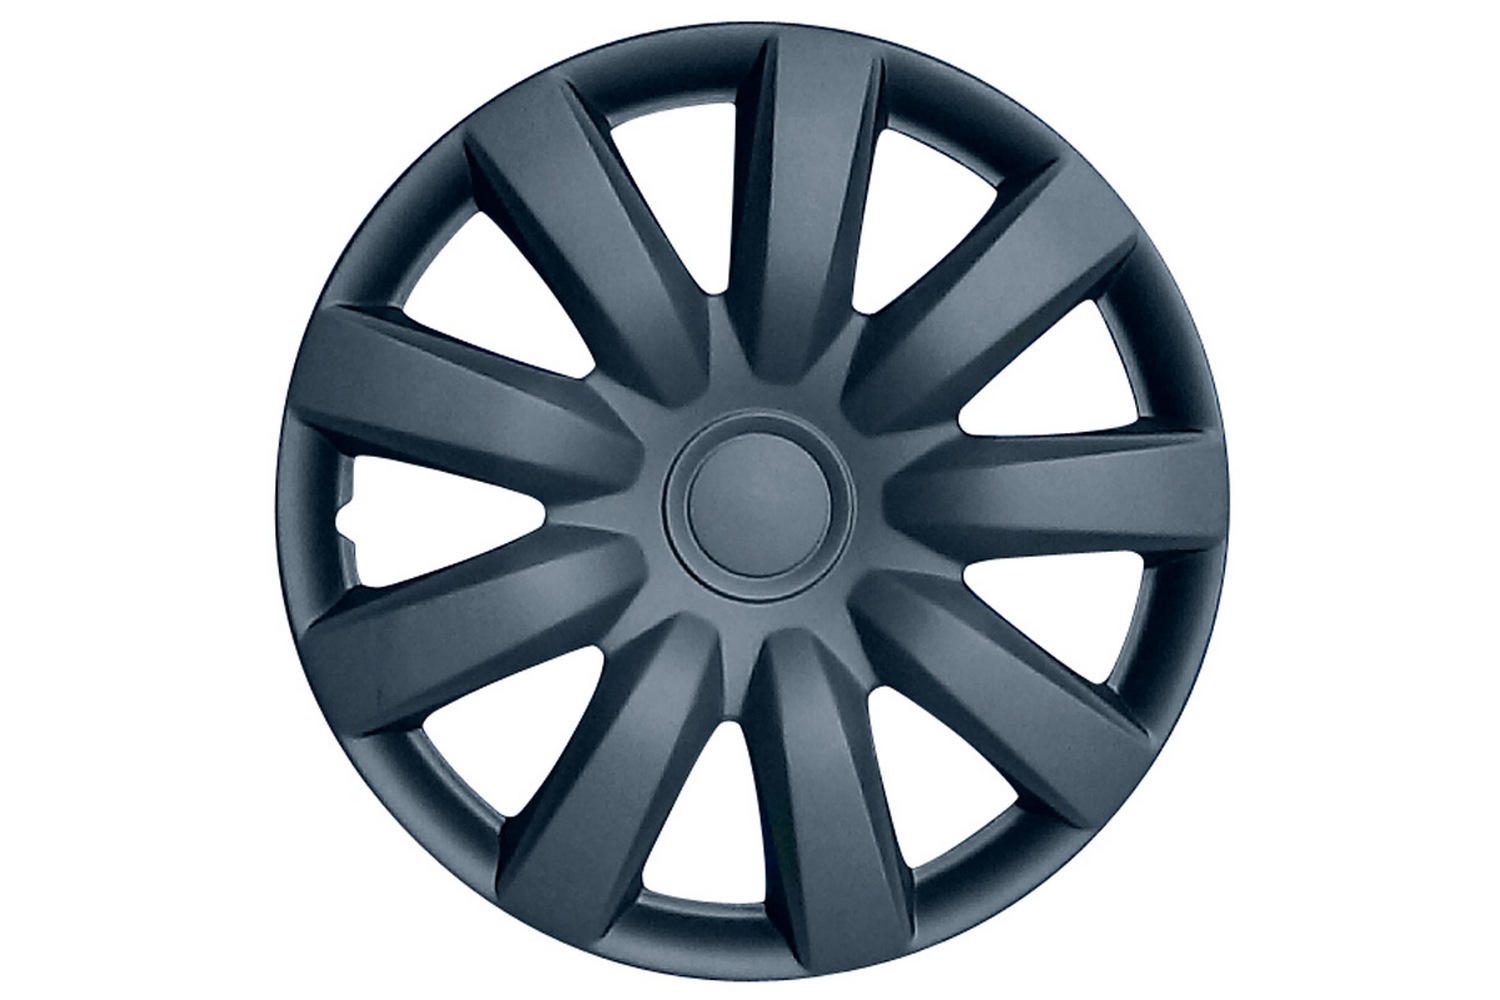 Wheel covers Alabama 15 inch set 4 pieces